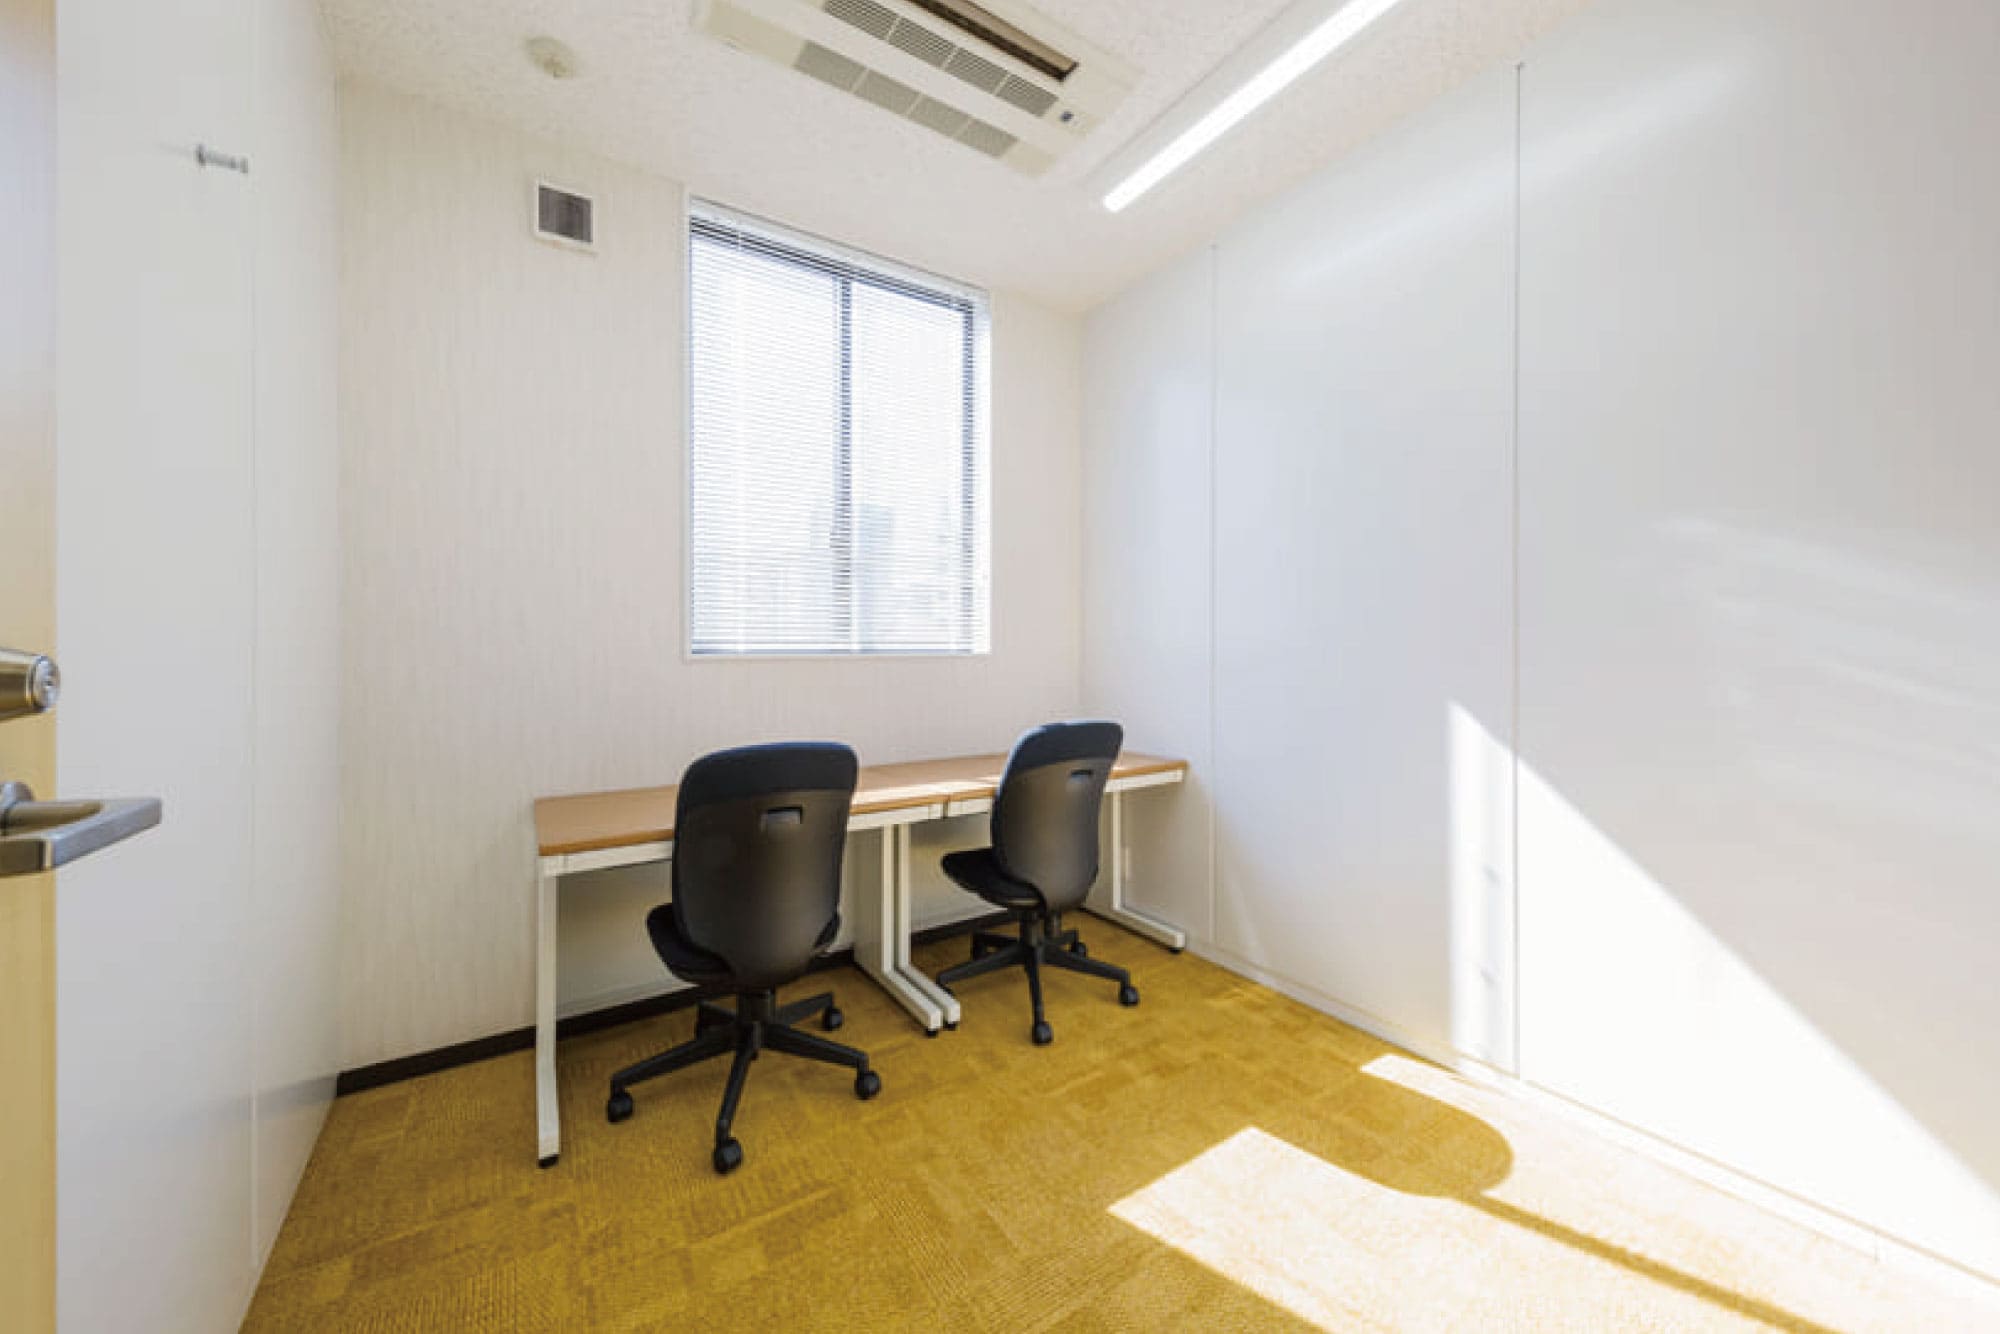 Office space for 2 to 3 person with window - TENSHO OFFICE Shimbashi Gochome